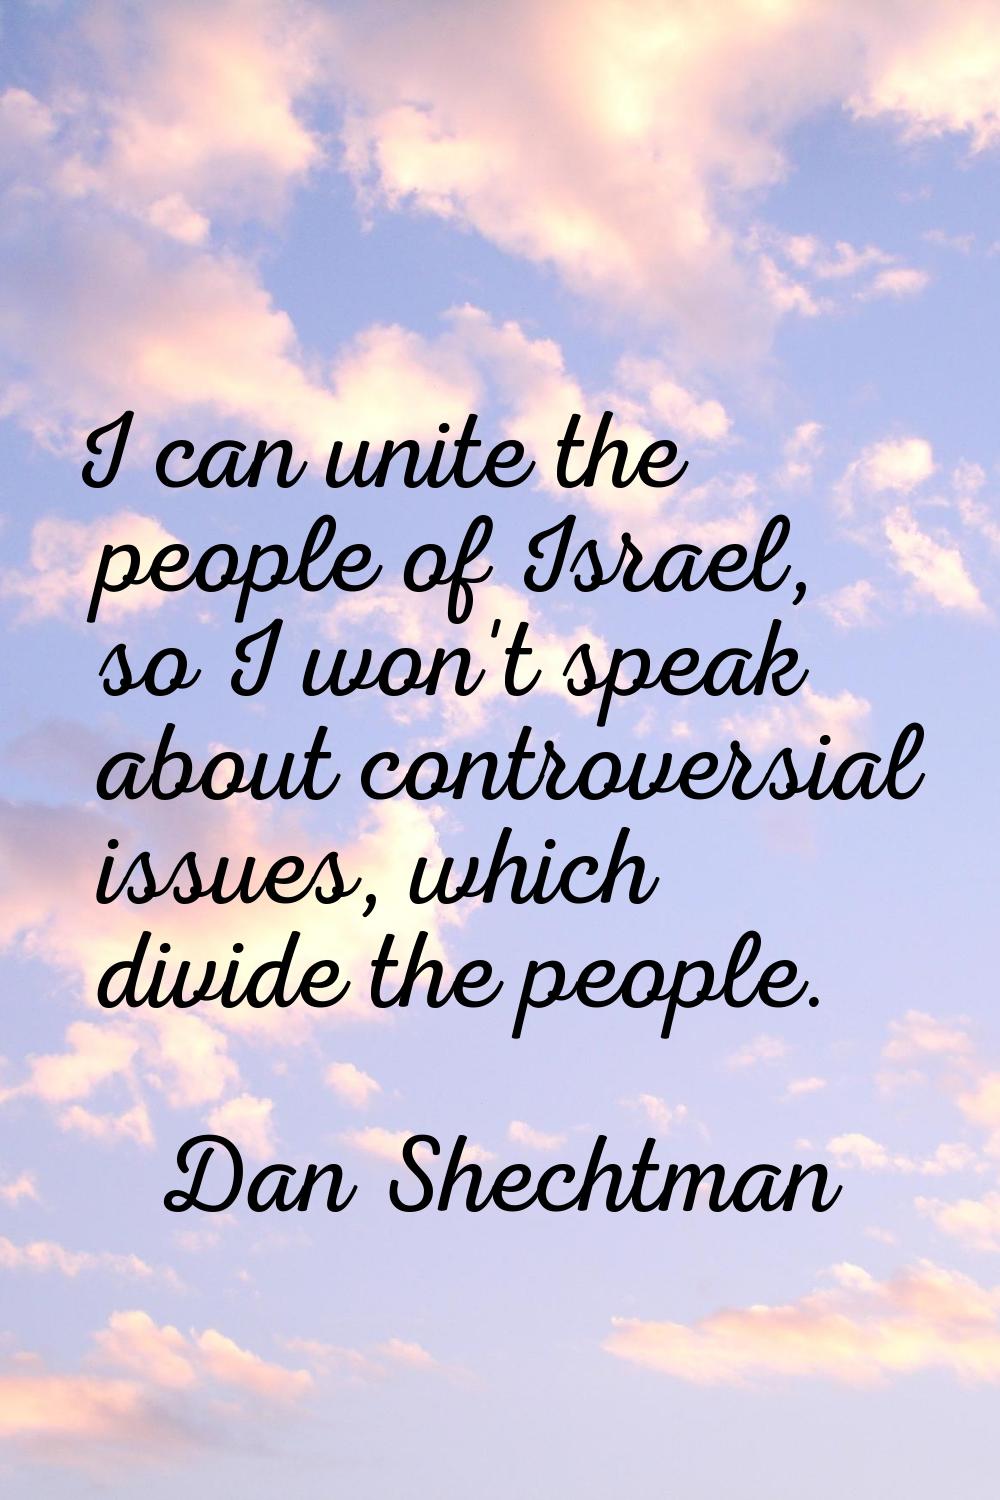 I can unite the people of Israel, so I won't speak about controversial issues, which divide the peo